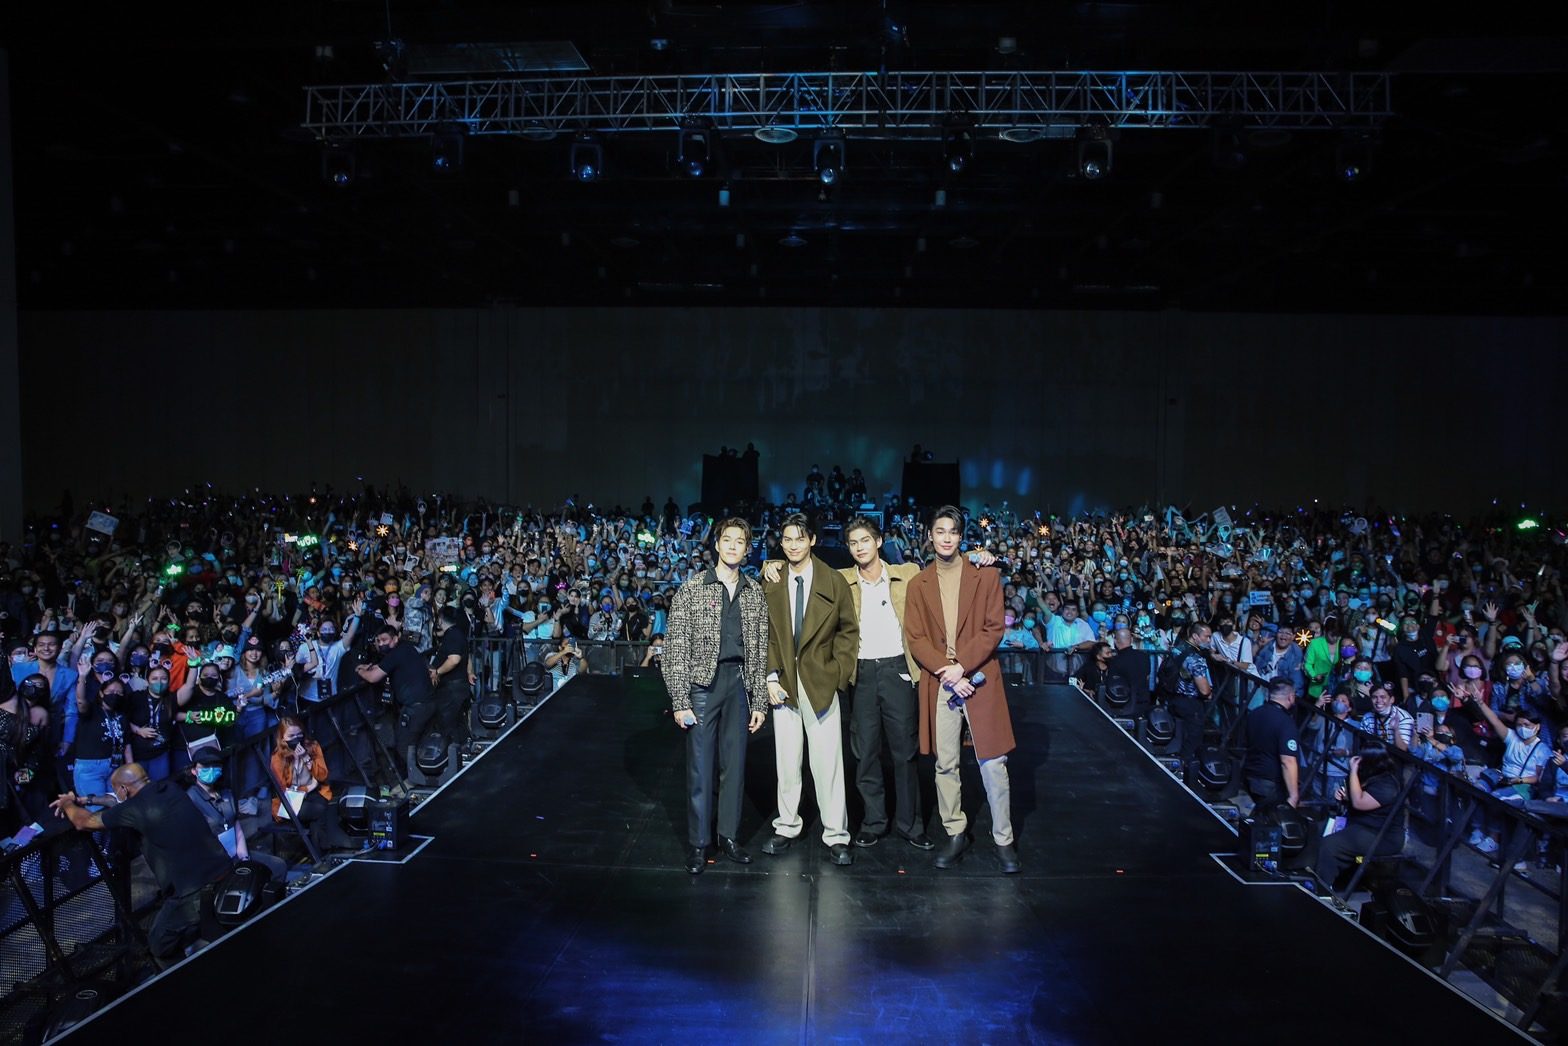 LOOK: ‘F4 Thailand’ cast hold ‘Shooting Star’ concert in Manila